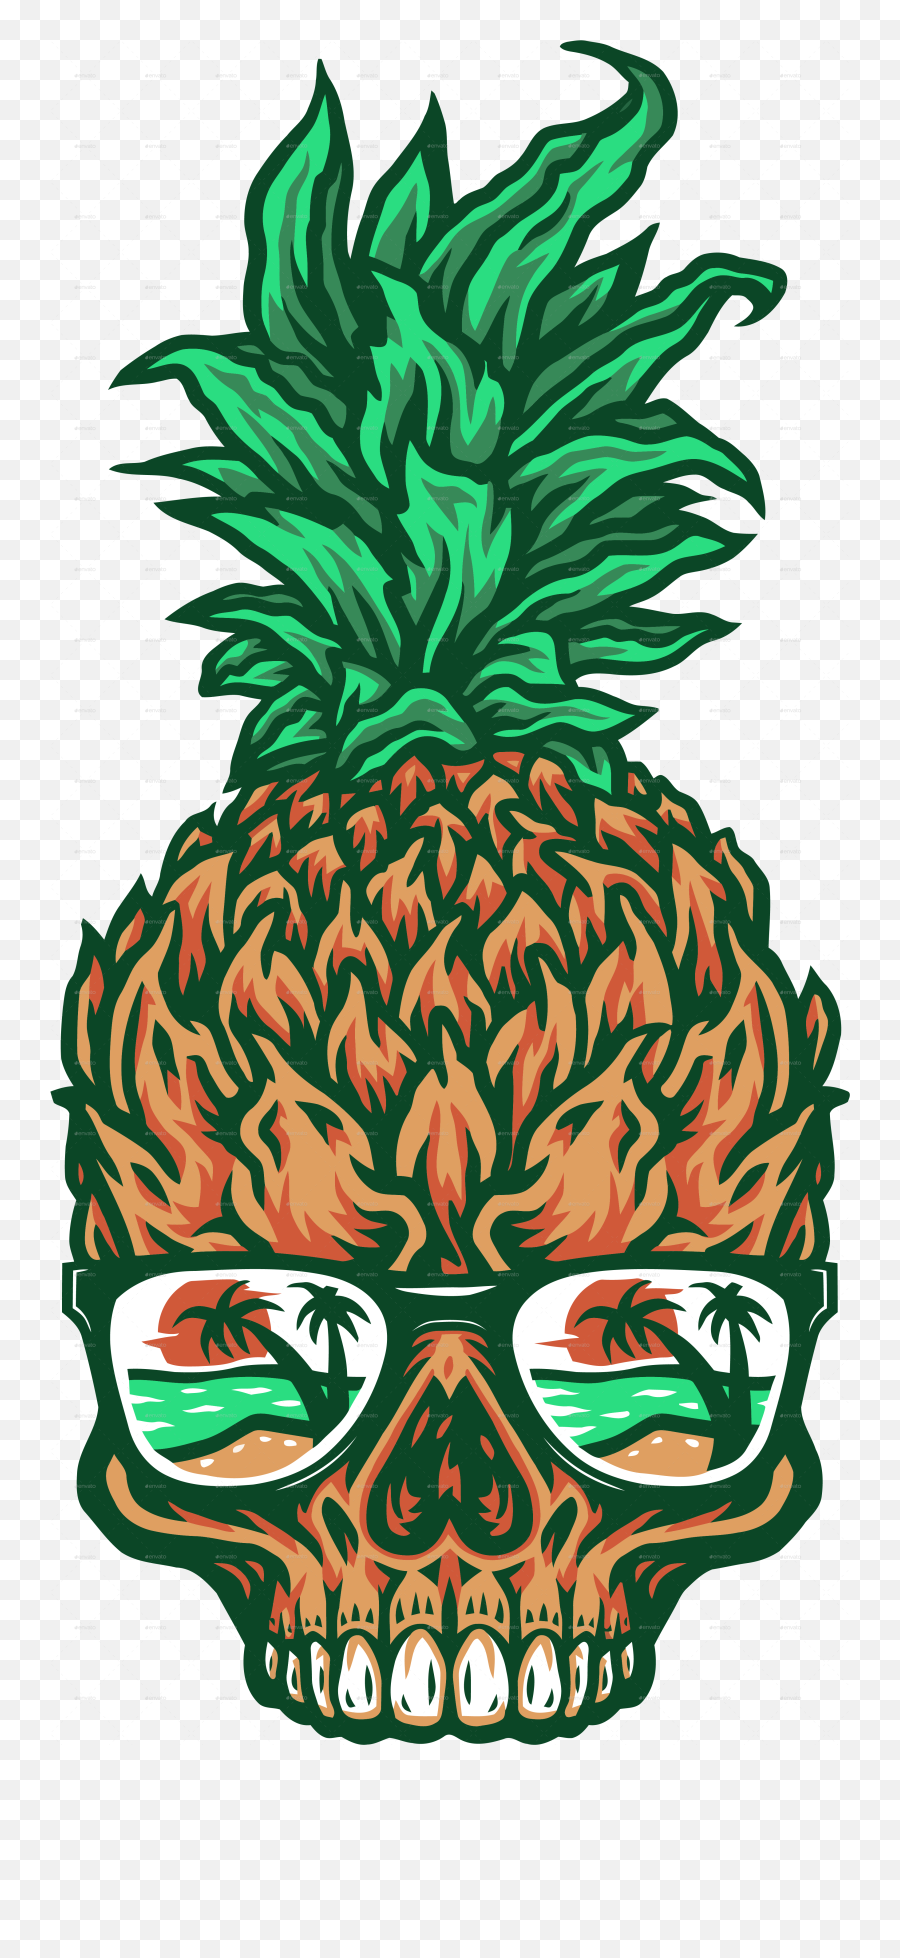 Pineapple Skull - Pineapple Graphic Png,Pineapple Transparent Background